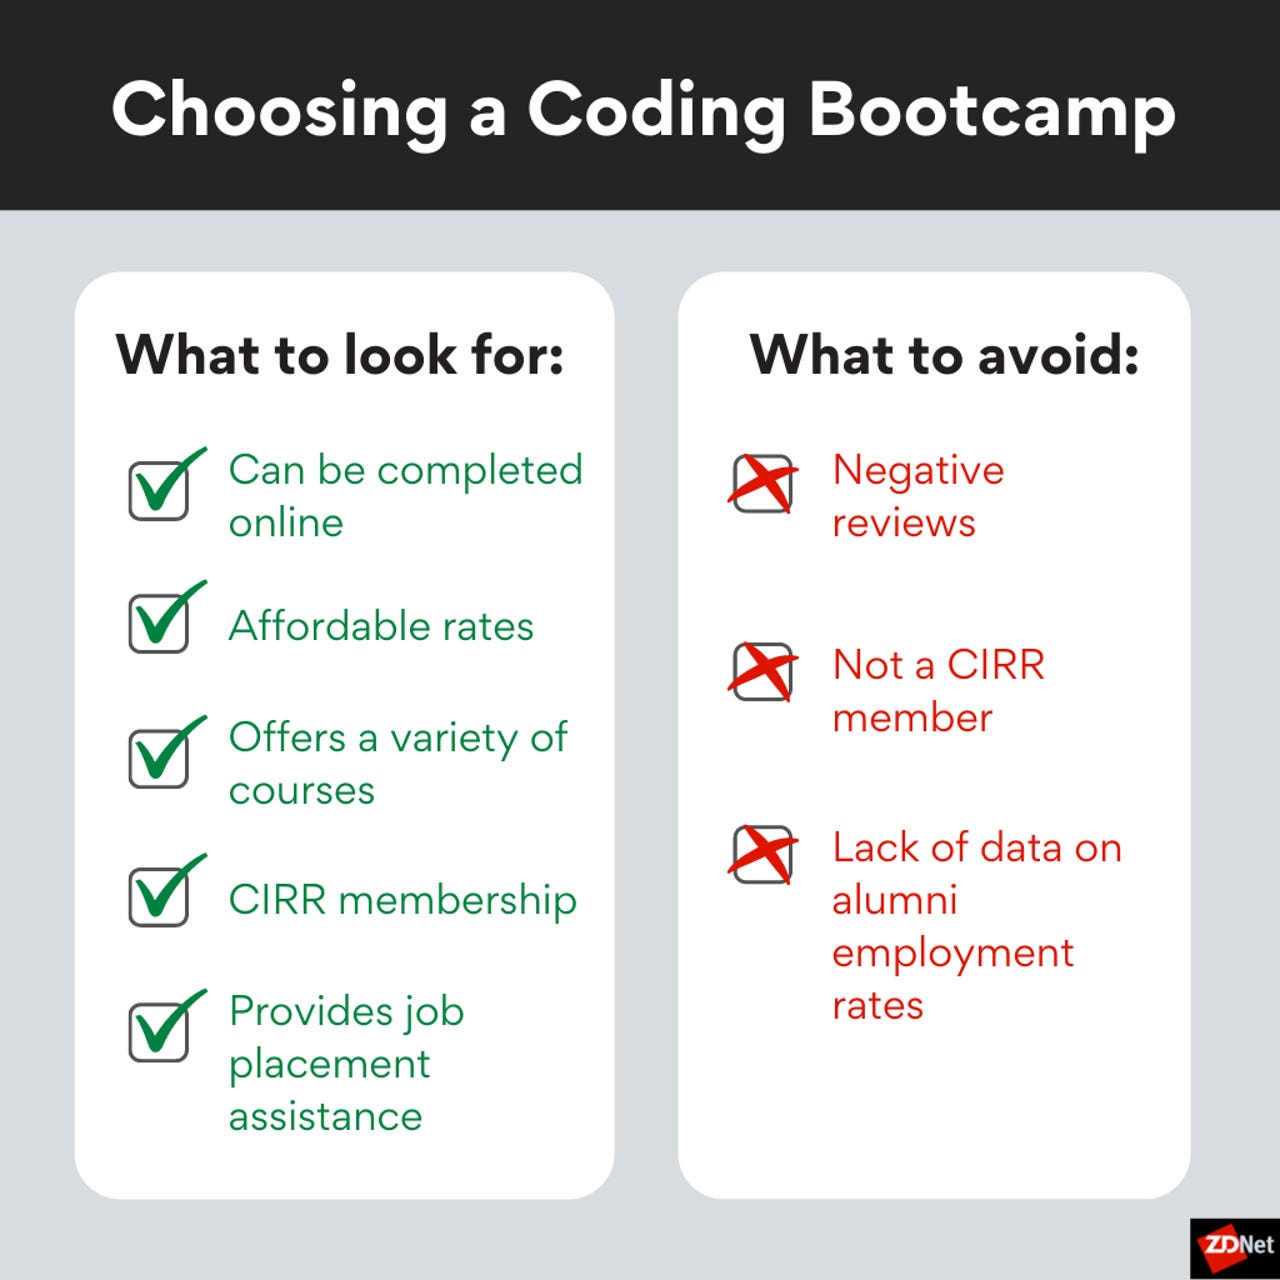 A chart showing things to look for and things to avoid while choosing a bootcamp. The "What to look for" column includes: Can be completed online. Affordable rates. Offers a variety of courses. CIRR membership. Provides job placement assistance. The "What to avoid" column includes negative reviews, not a CIRR member, and lack of data on alumni employment rates.